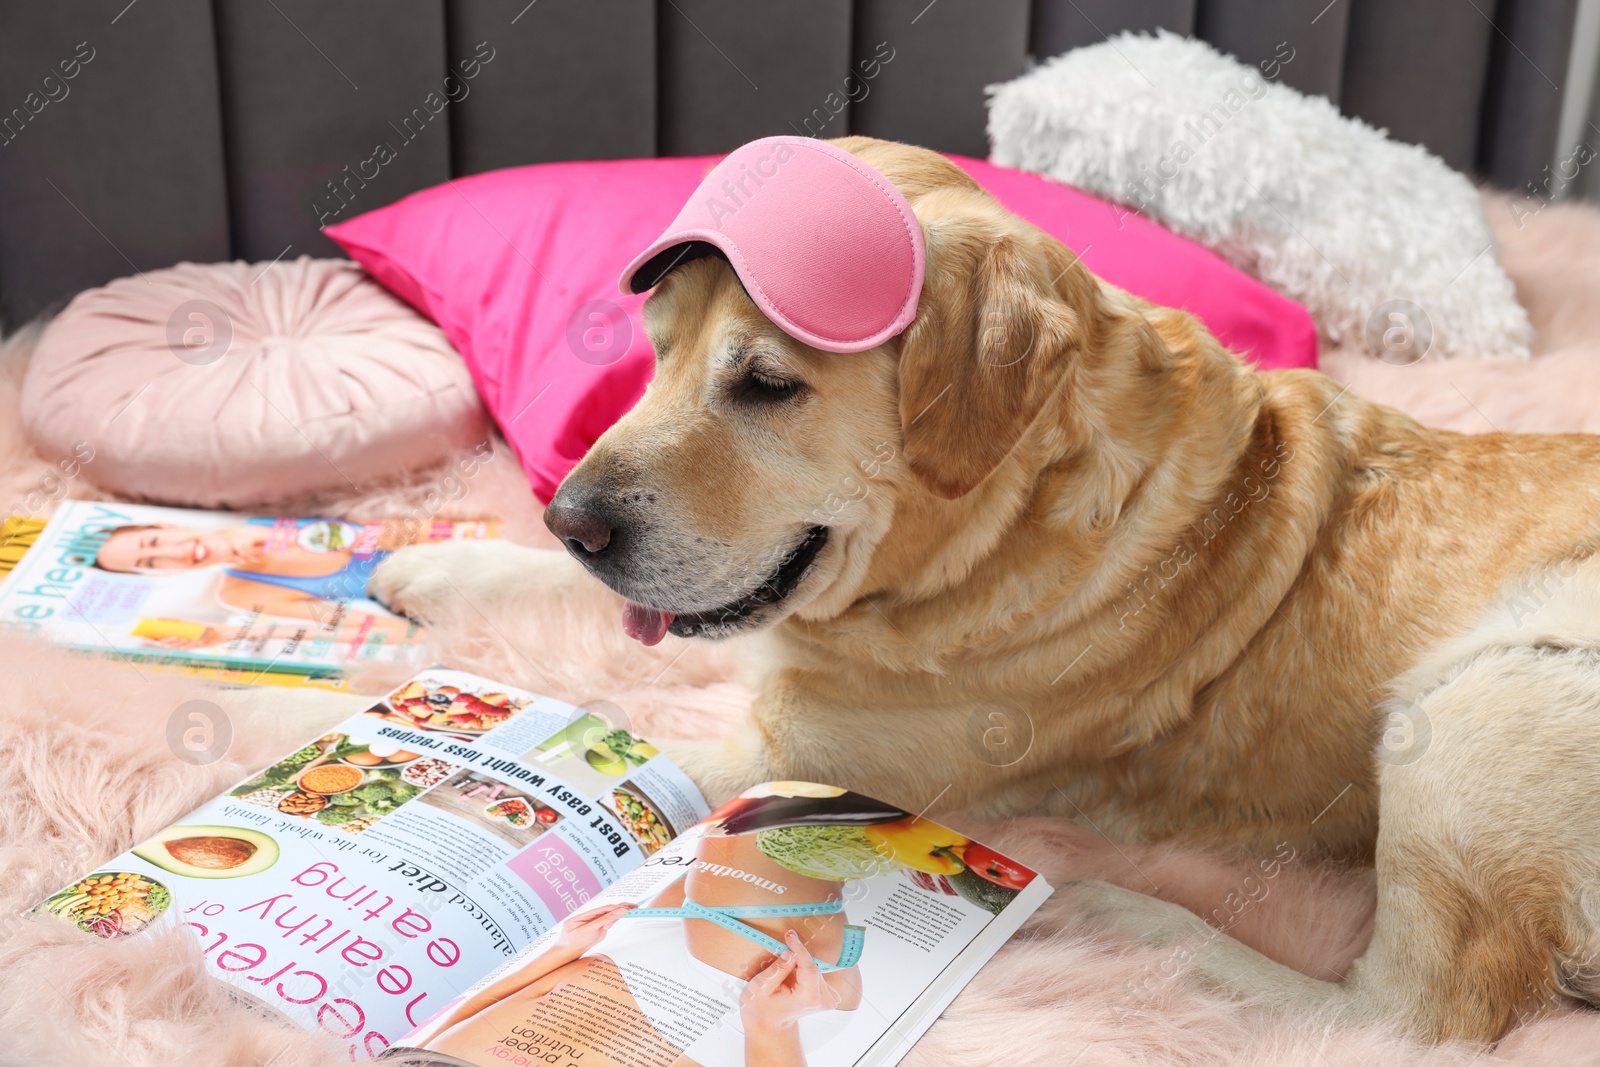 Photo of Cute Labrador Retriever with sleep mask and magazines on bed